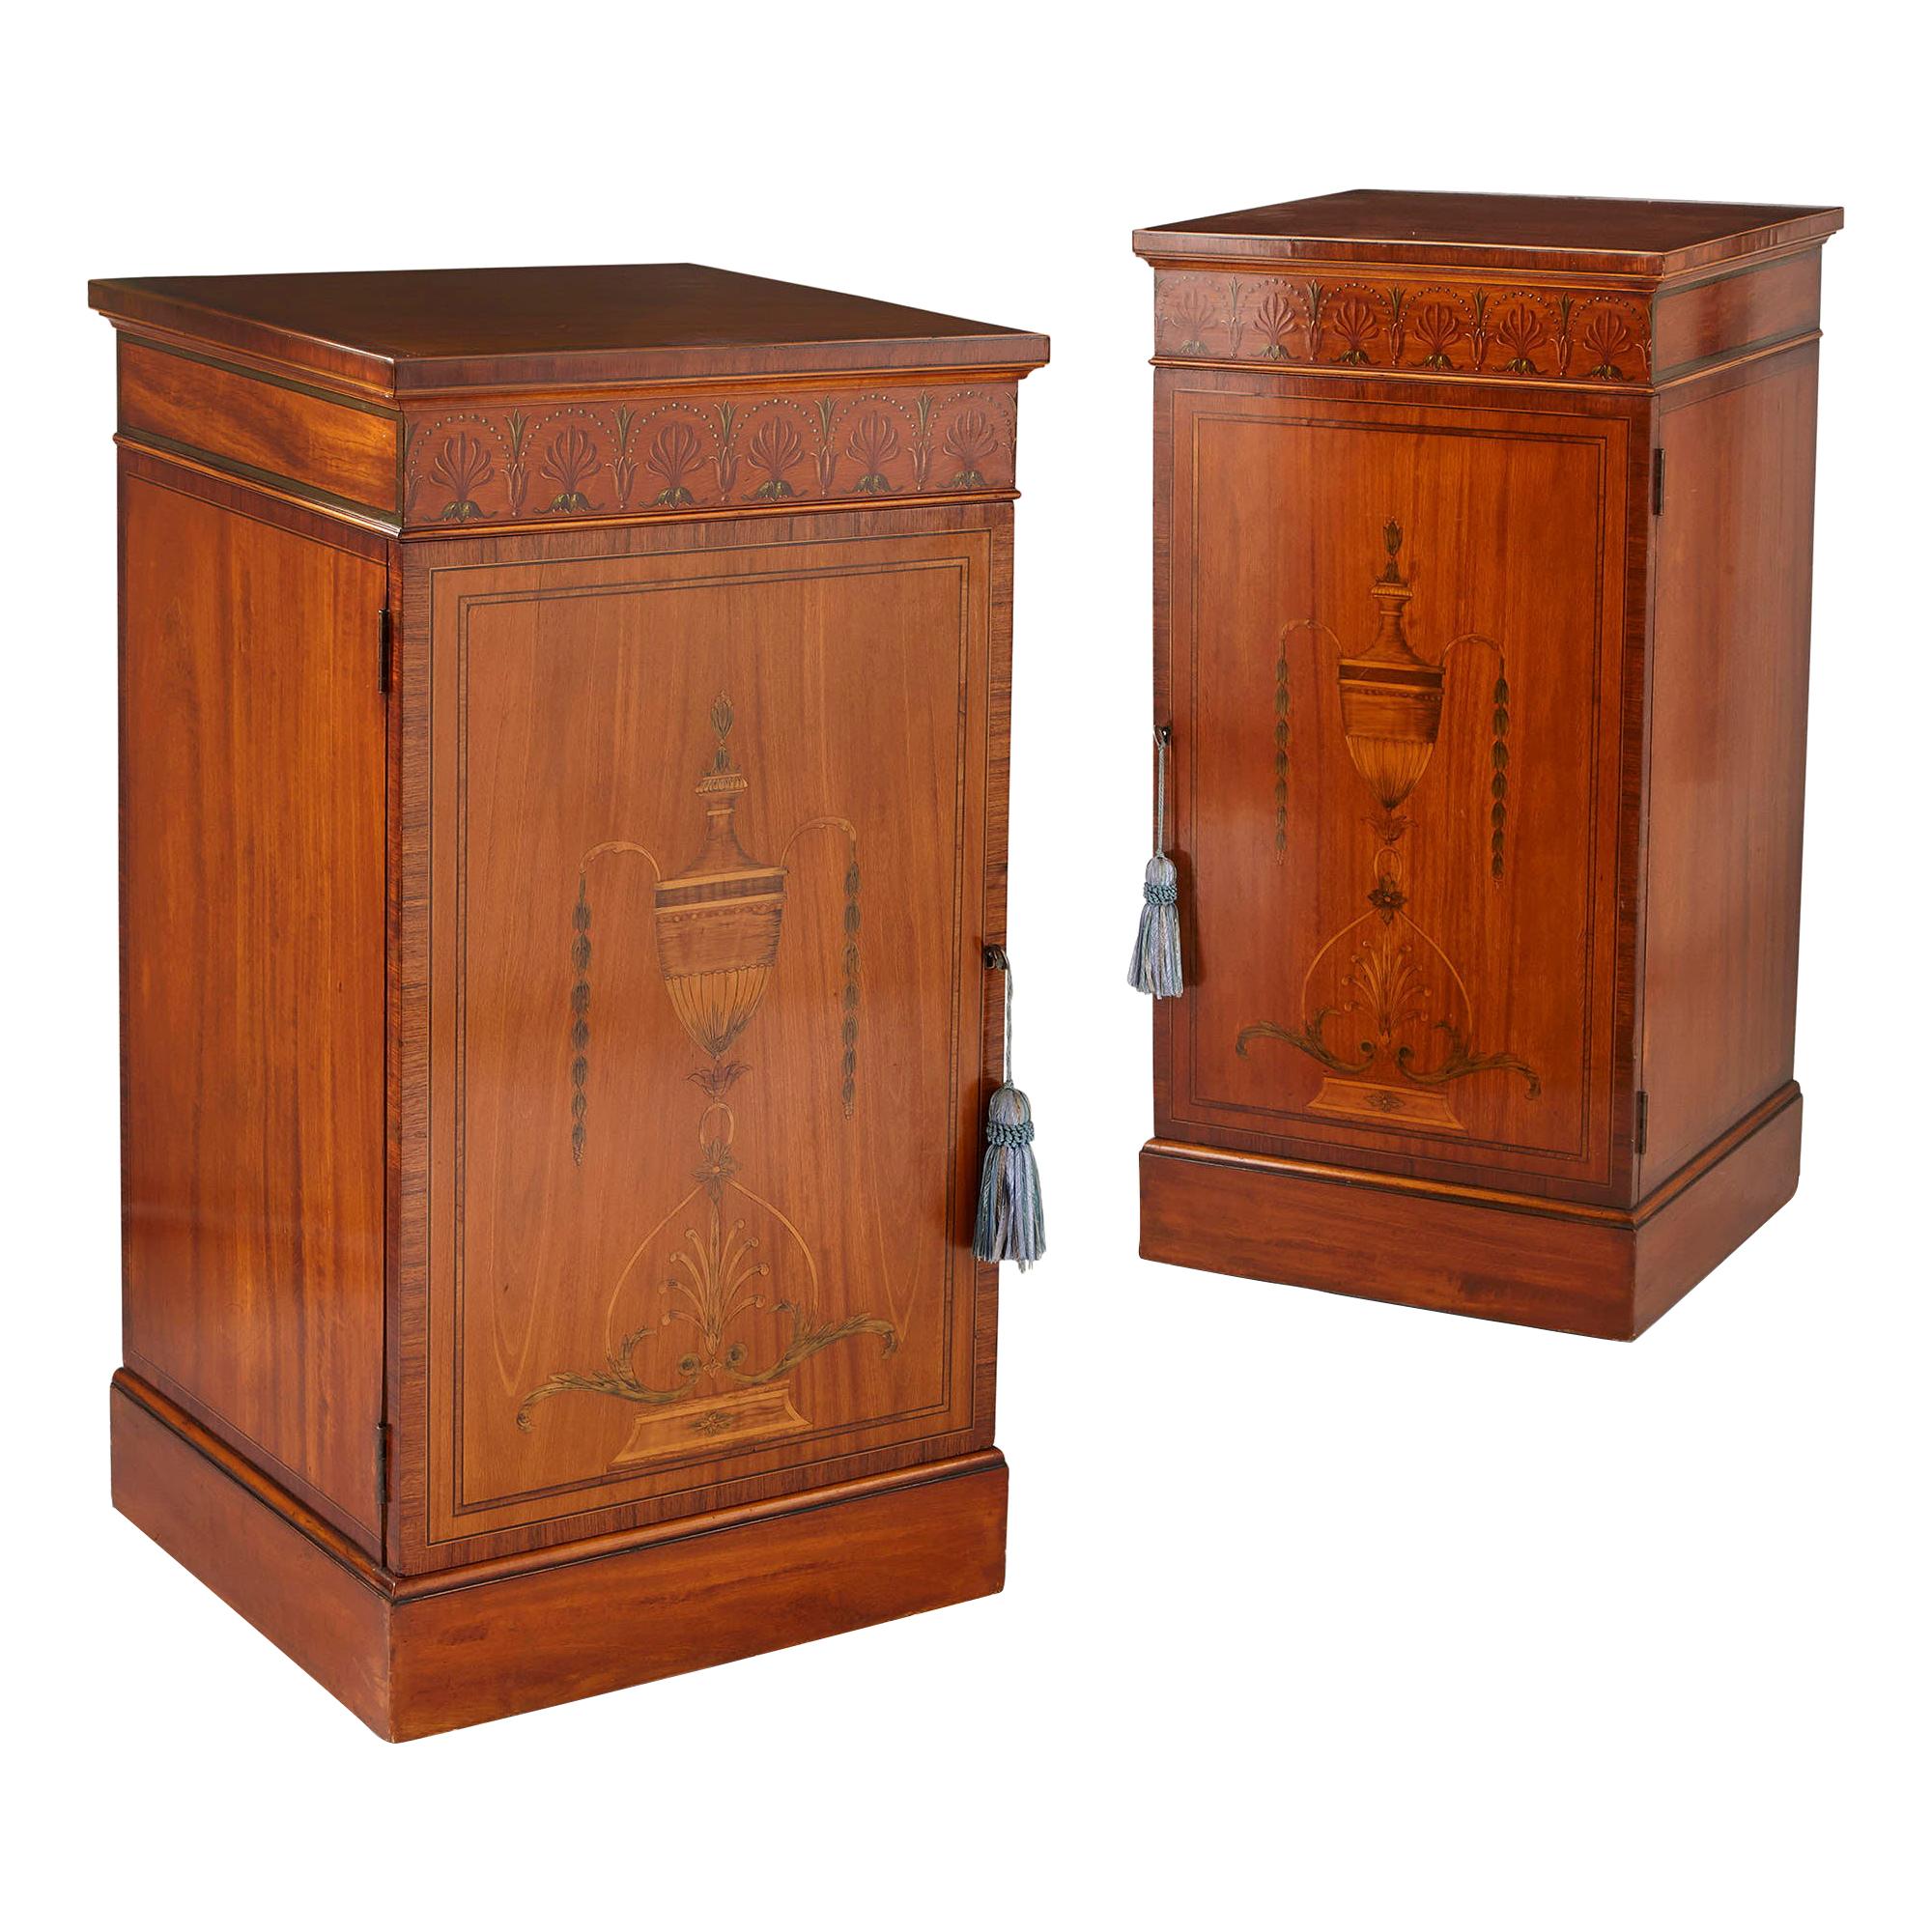 Two Antique Satinwood and Rosewood Marquetry Cabinets